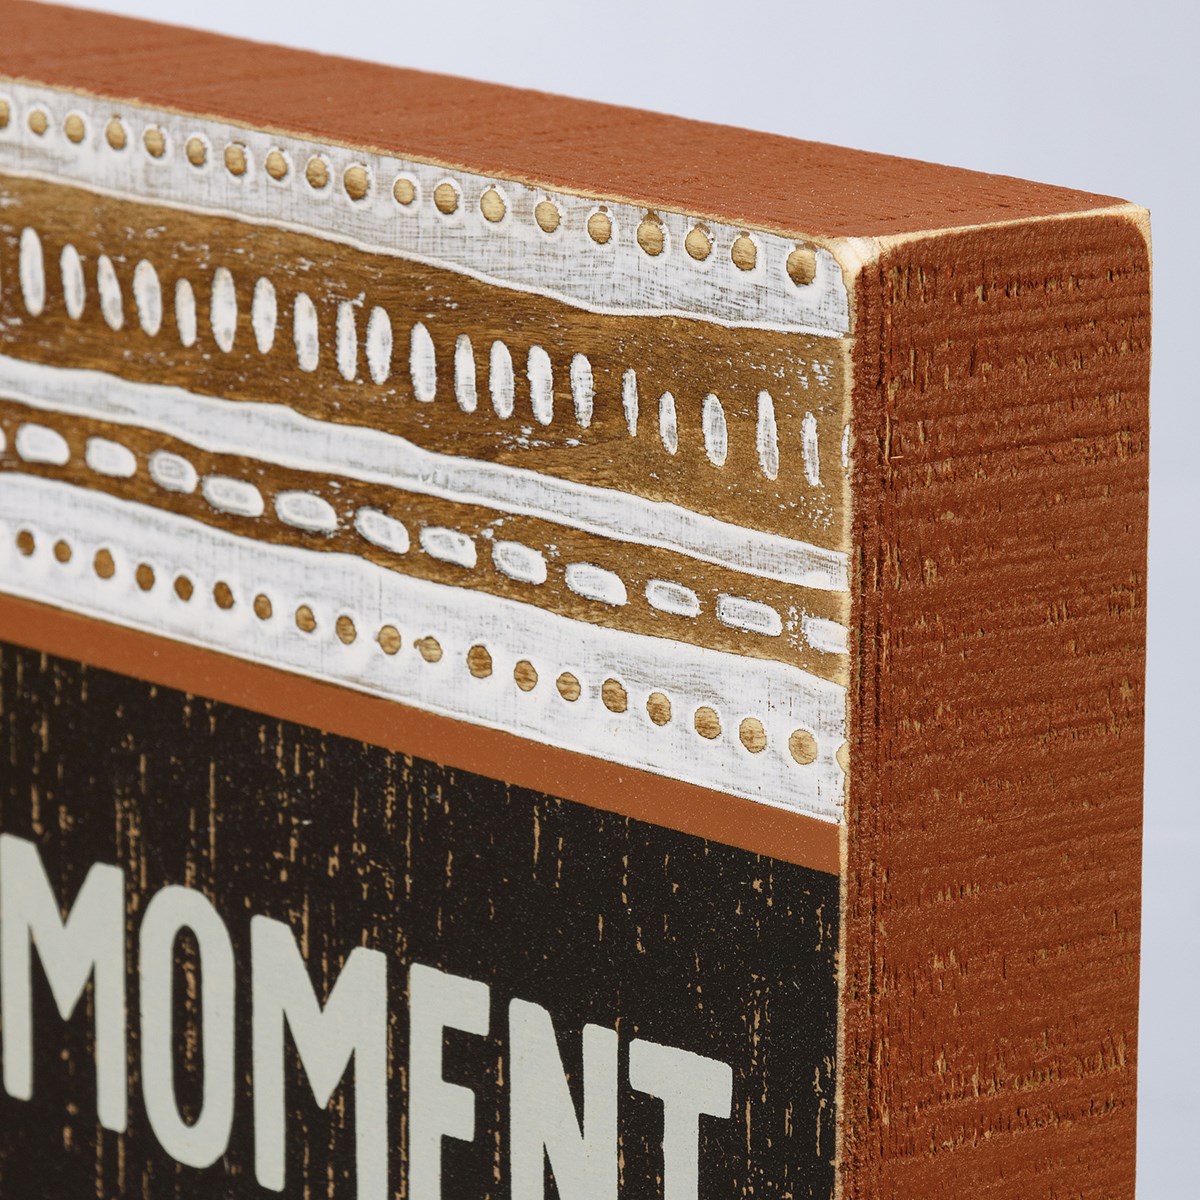 Live In The Moment Slat Box Sign - Wood